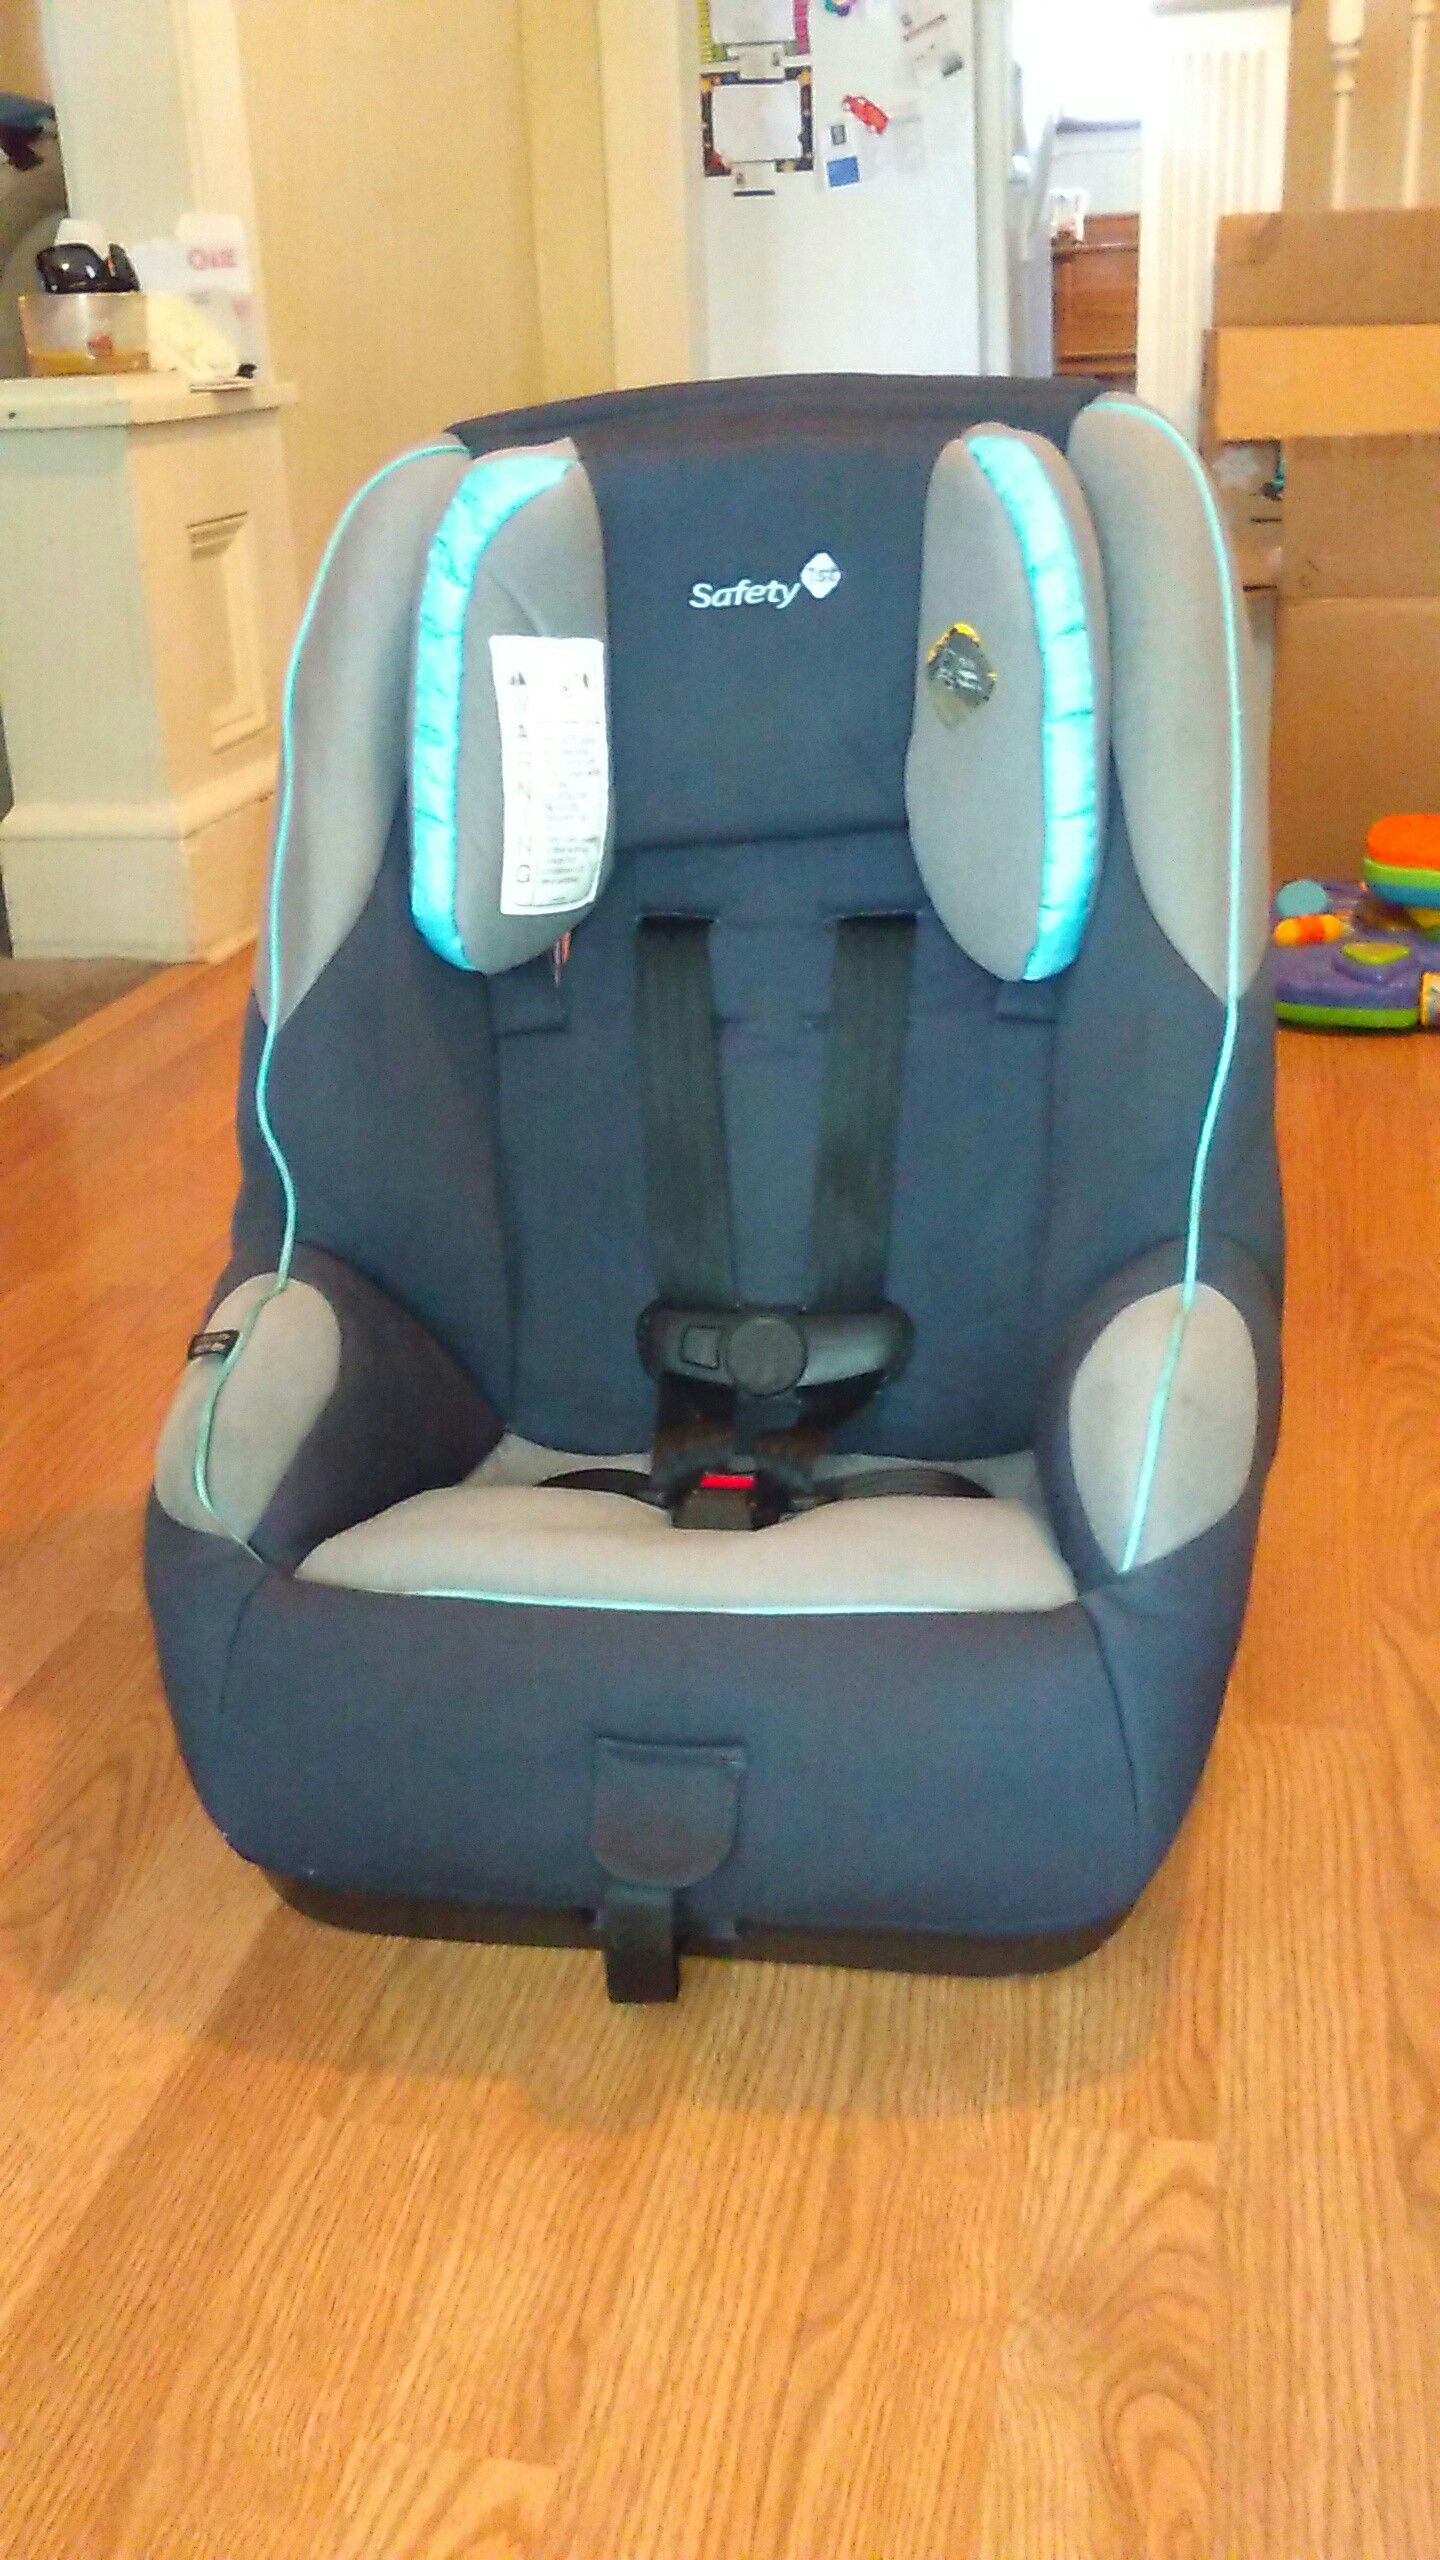 Car seat/booster seat by Safety 1st